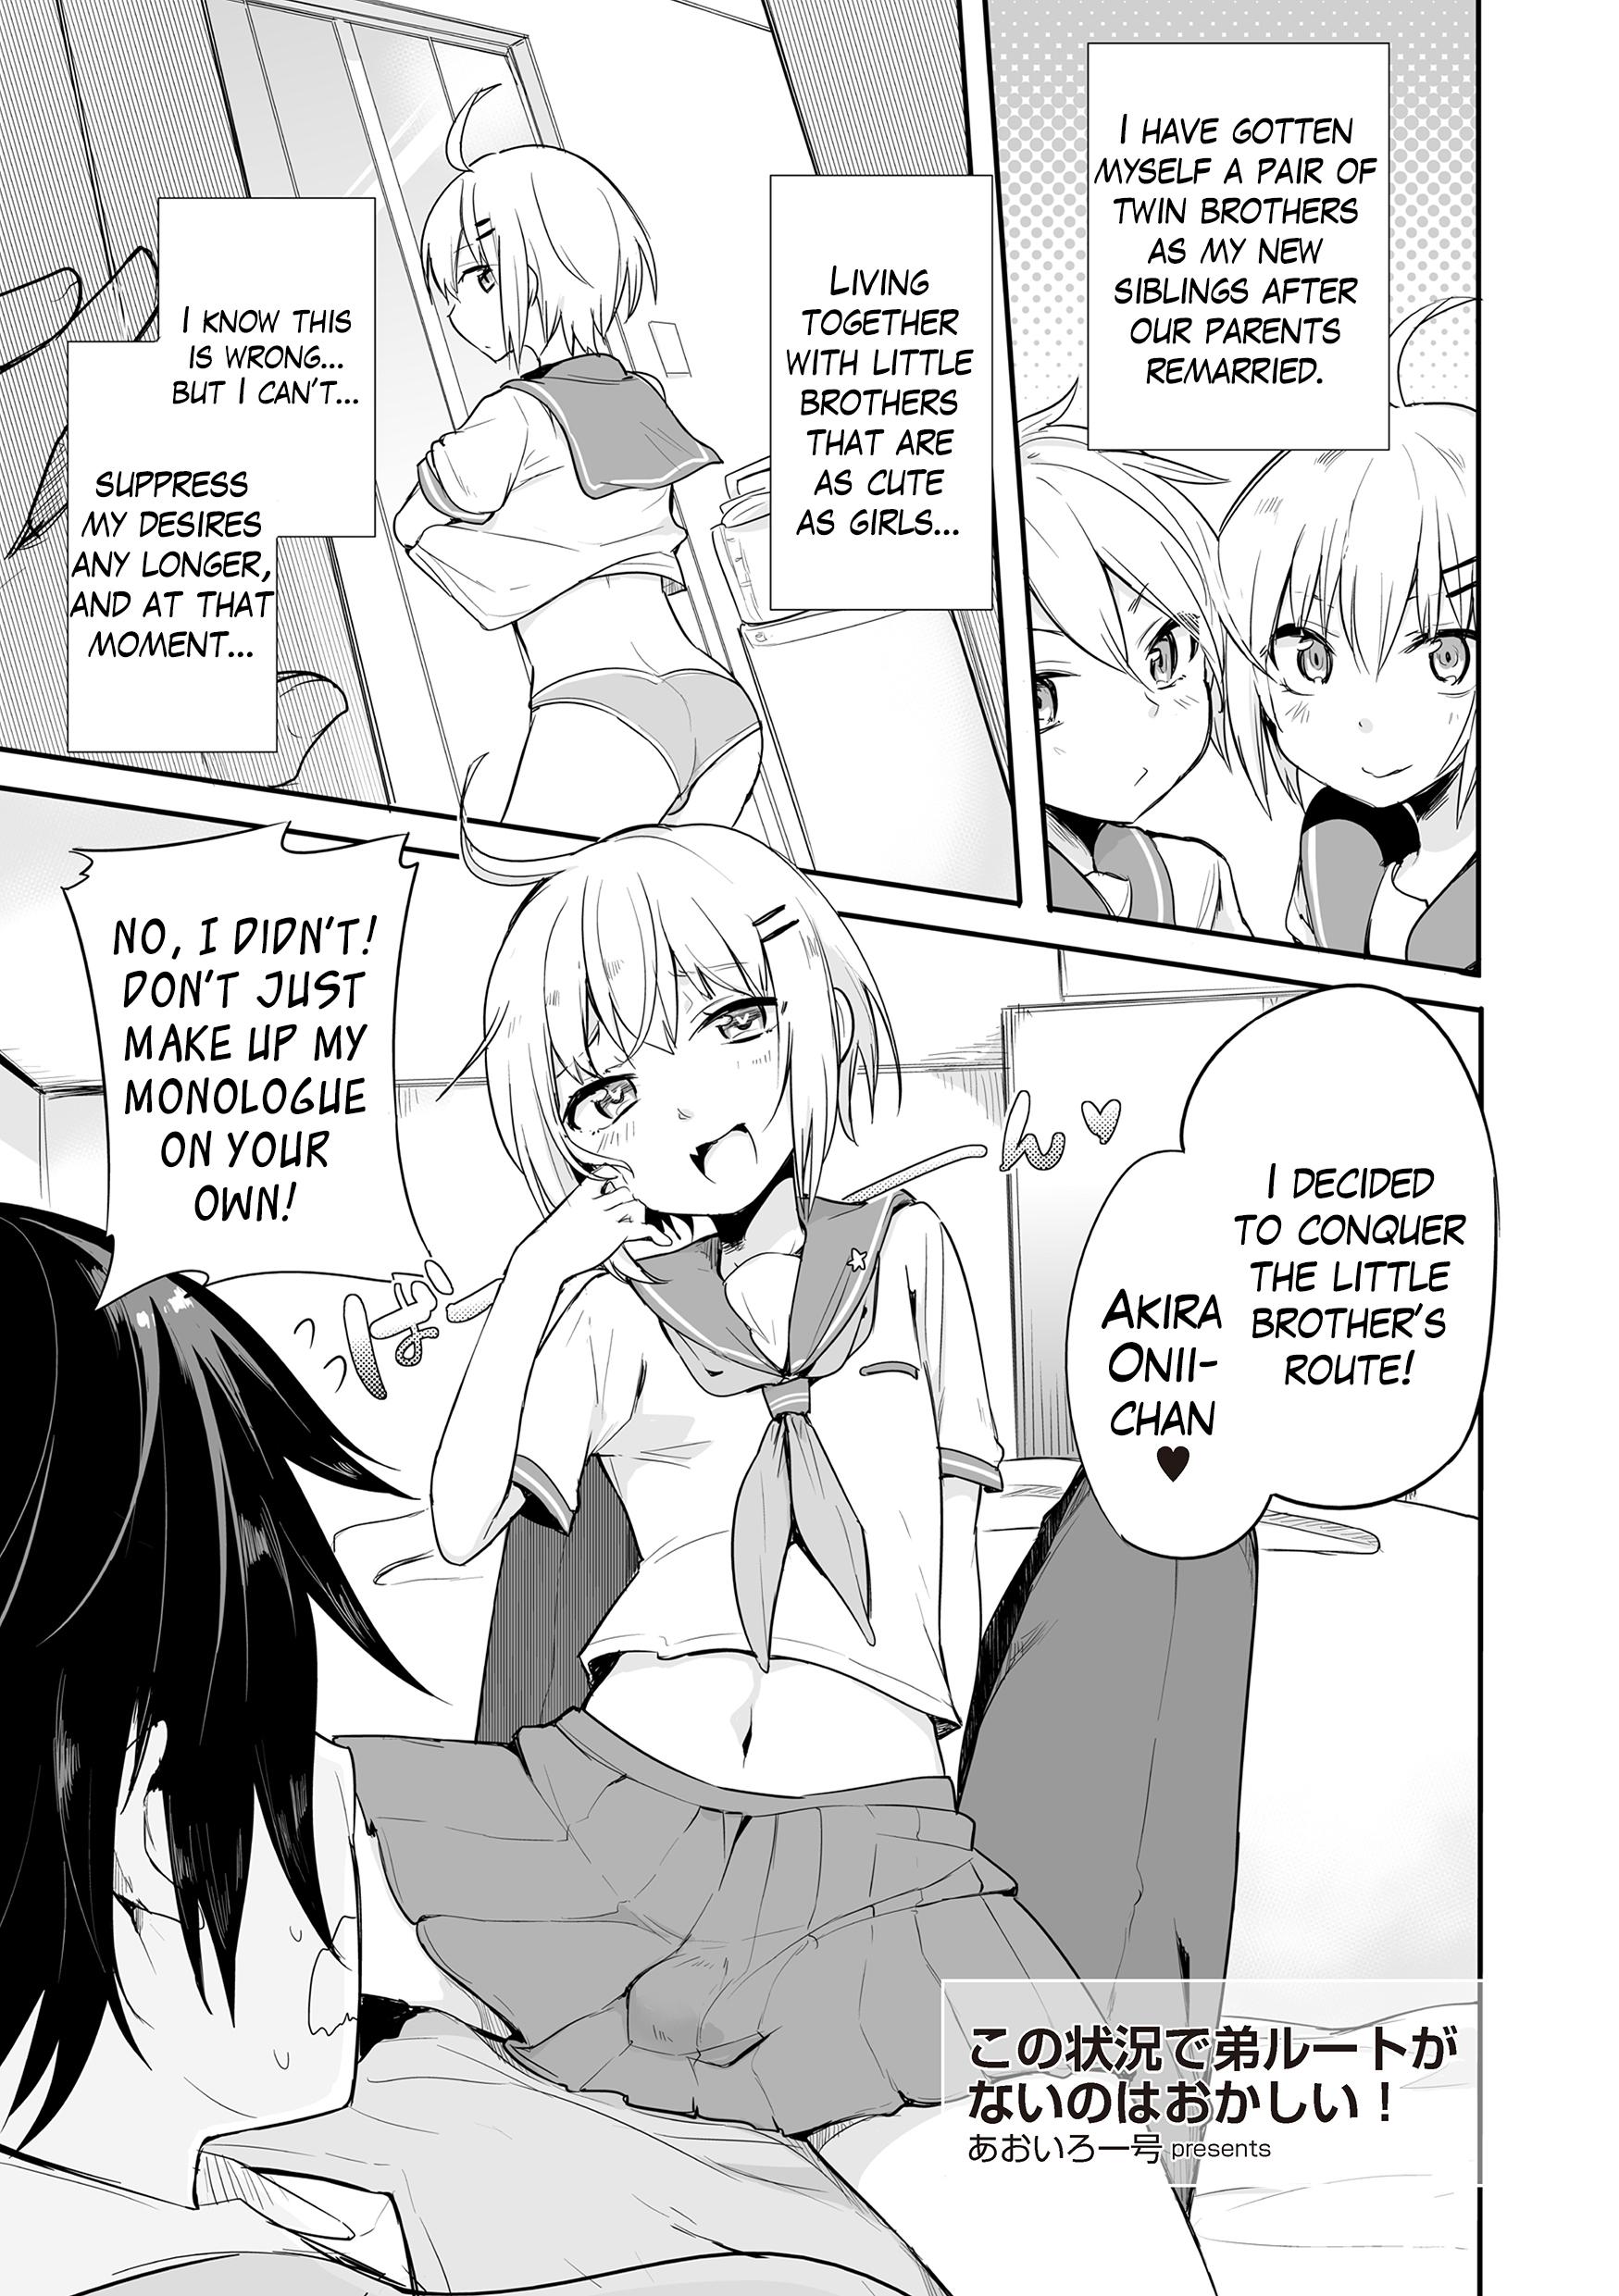 Thief Kono Joukyou de Otouto Route ga nai no wa Okashii! | This Situation is too Weird for it not to be a Little Brother’s Route! Cum In Pussy - Page 2